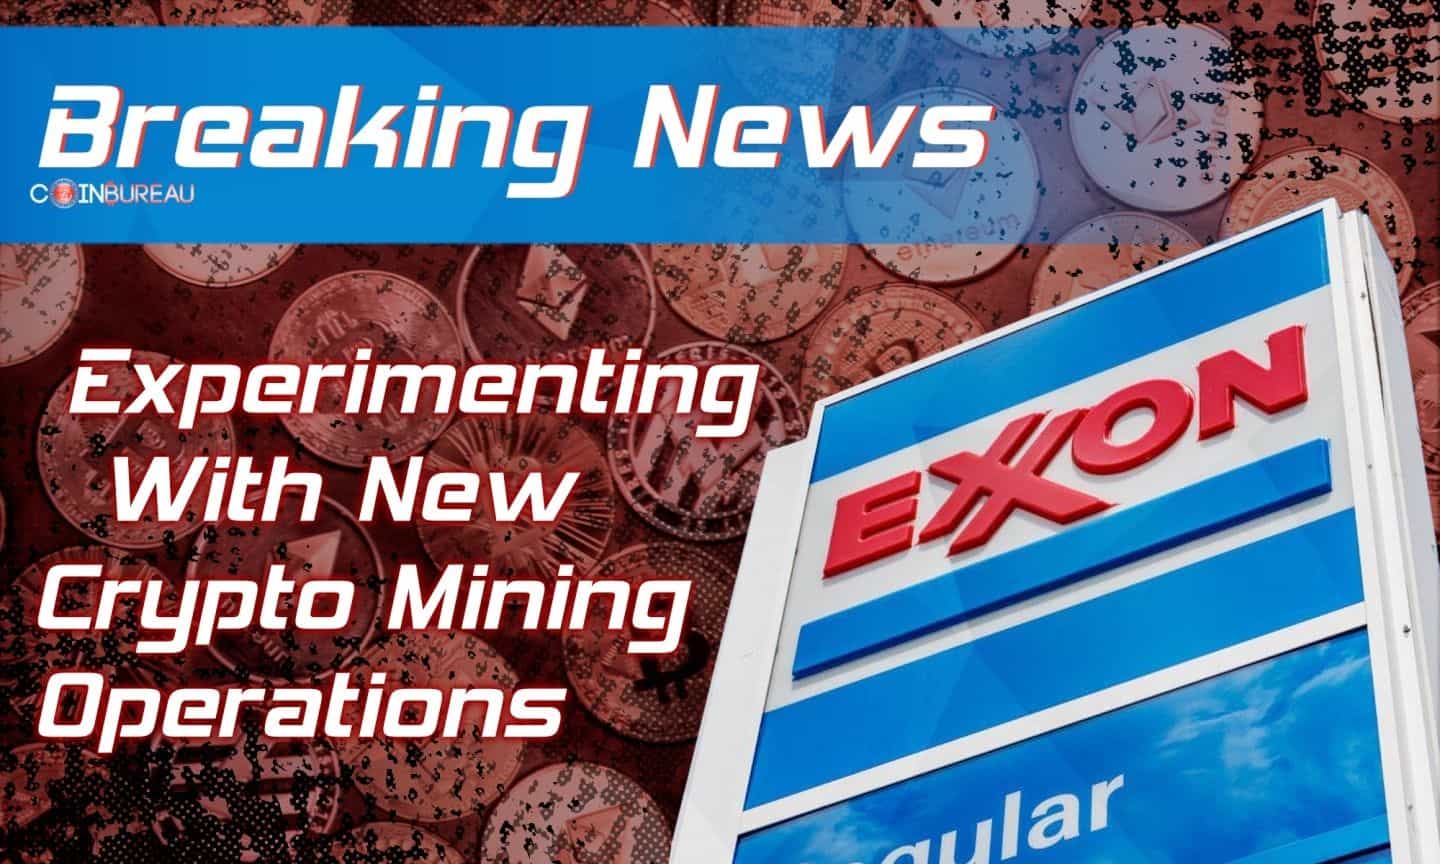 Oil Giant Exxon Experimenting With New Crypto Mining Operations: Report